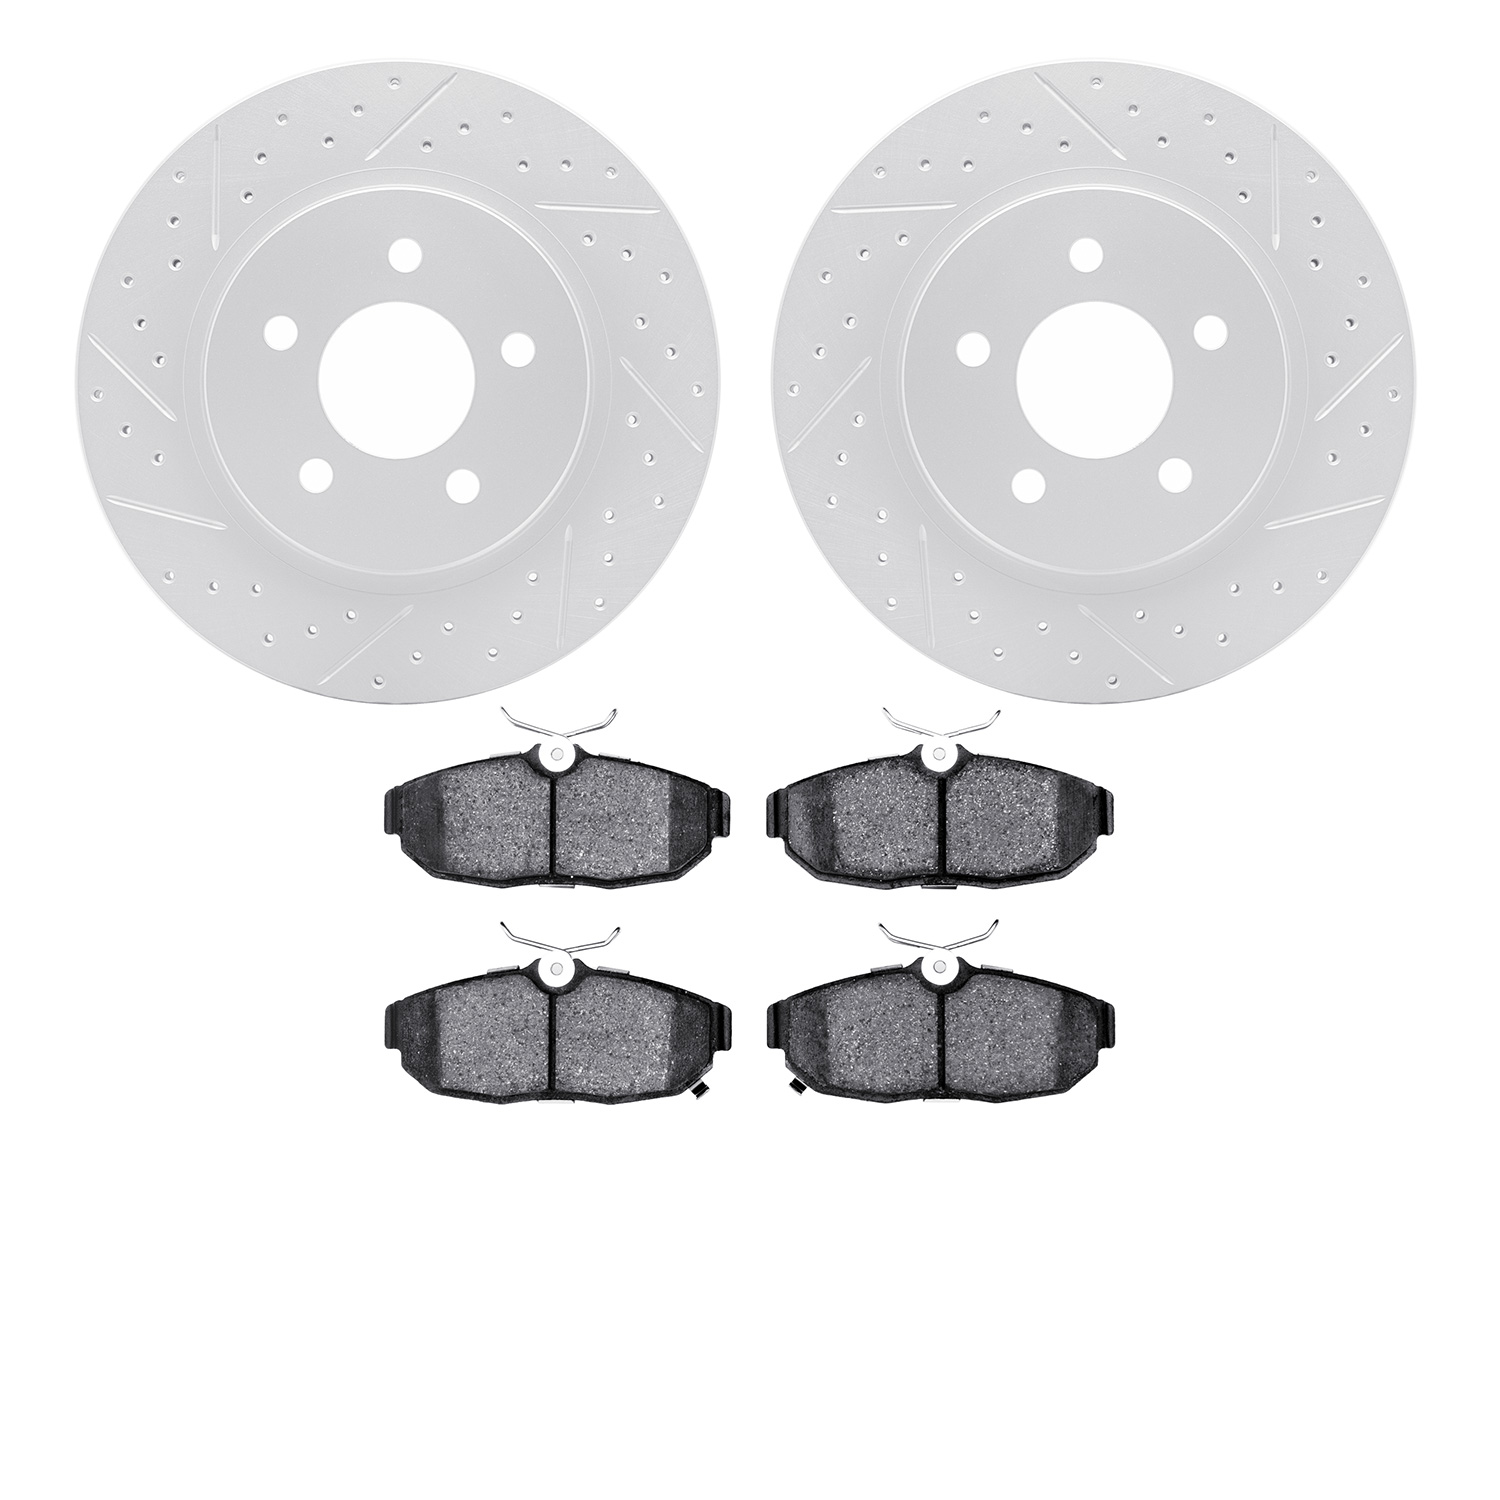 2502-54047 Geoperformance Drilled/Slotted Rotors w/5000 Advanced Brake Pads Kit, 2012-2014 Ford/Lincoln/Mercury/Mazda, Position: